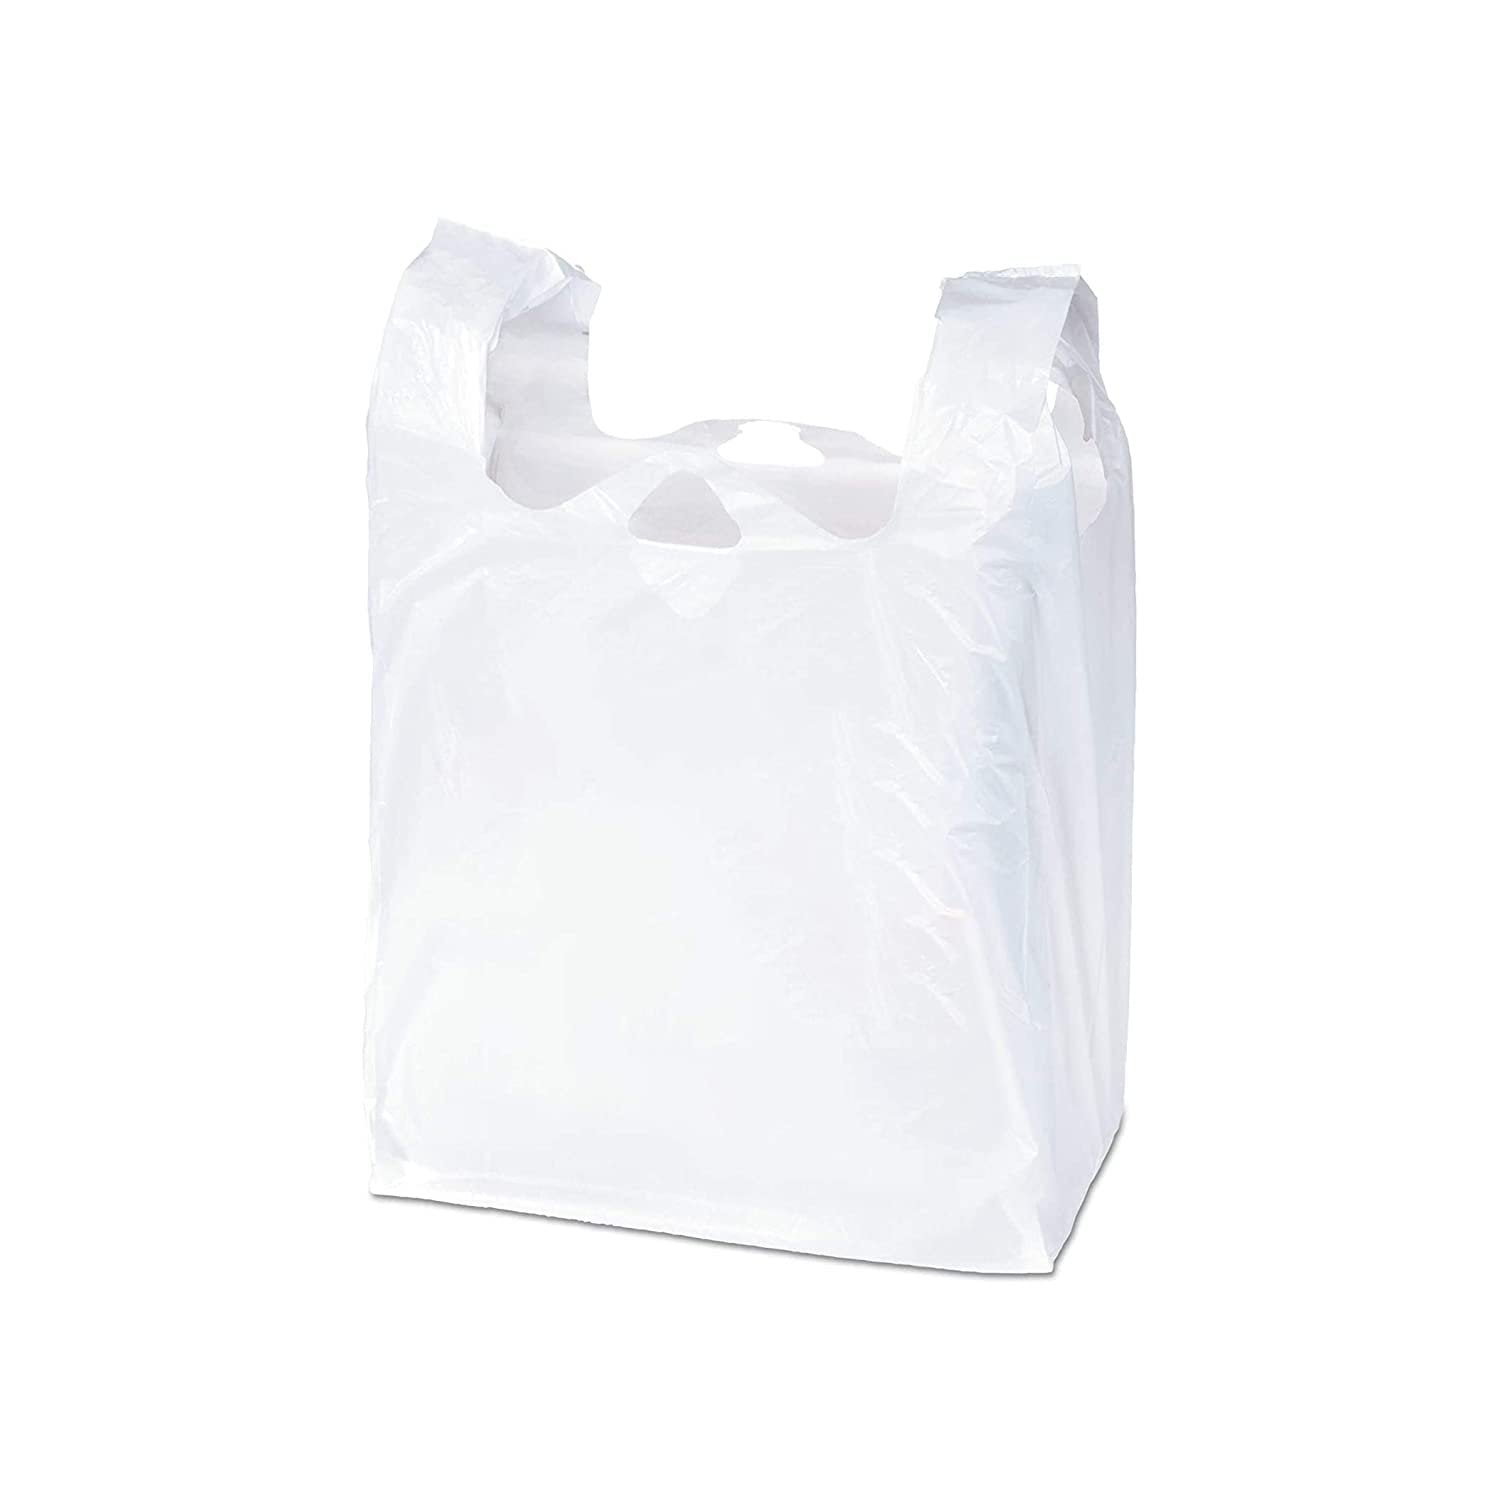 Durable White Plain Grocery Bags Handle Shopping Bags Multi-Use Large Size Merchandise Bags 100 LazyMe 12 x 20 inch White Plastic Thick T Shirt Bags 